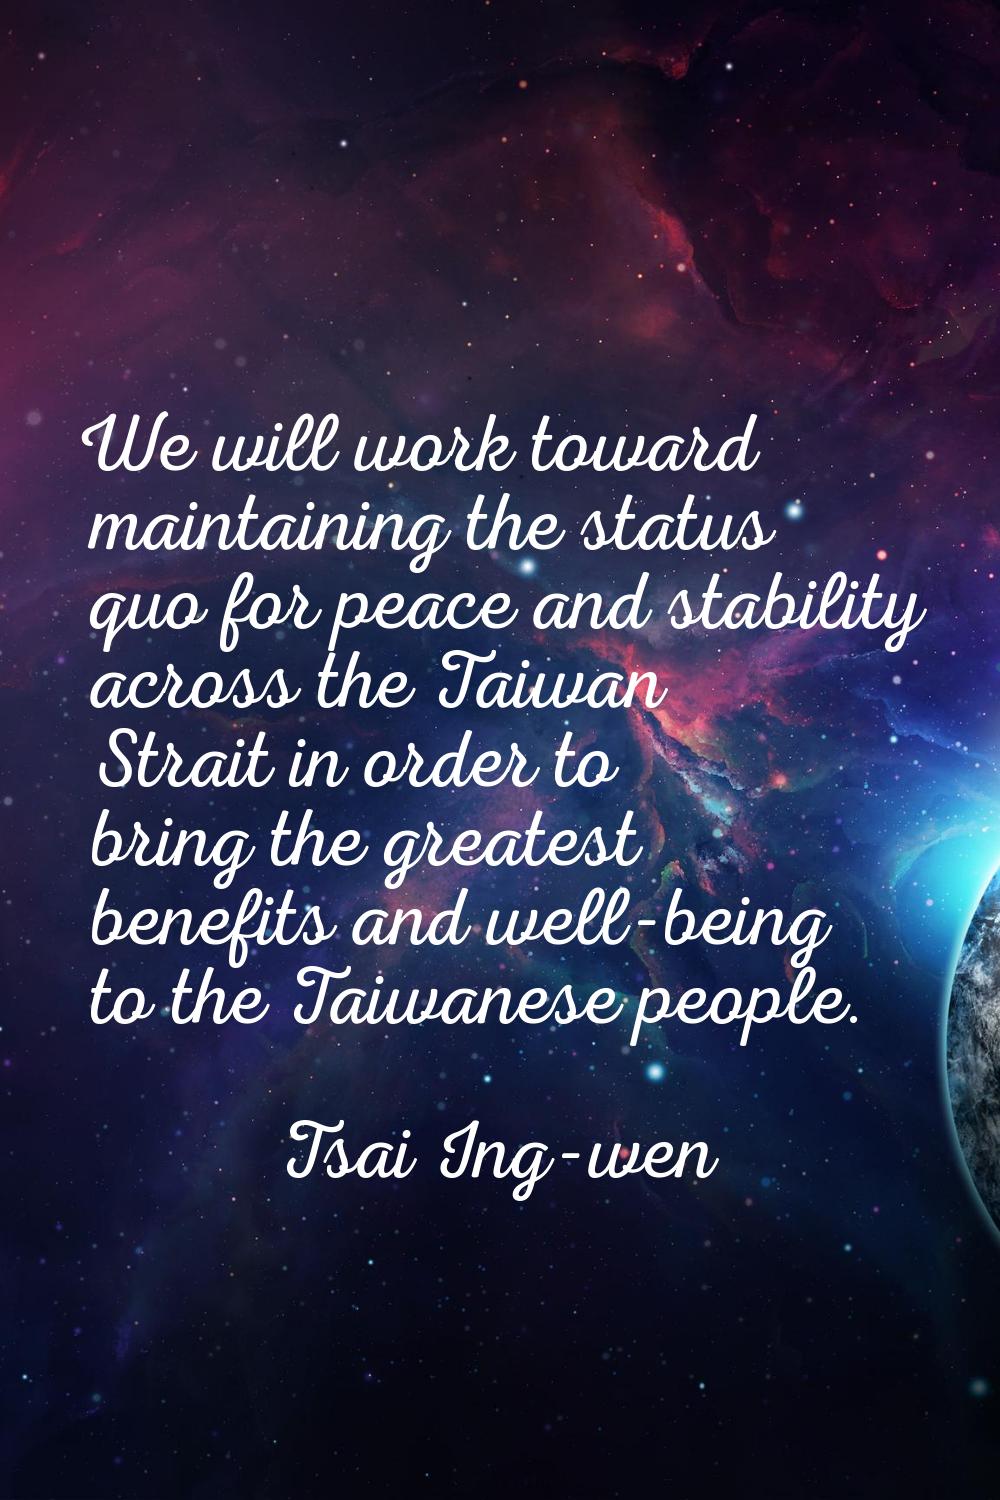 We will work toward maintaining the status quo for peace and stability across the Taiwan Strait in 